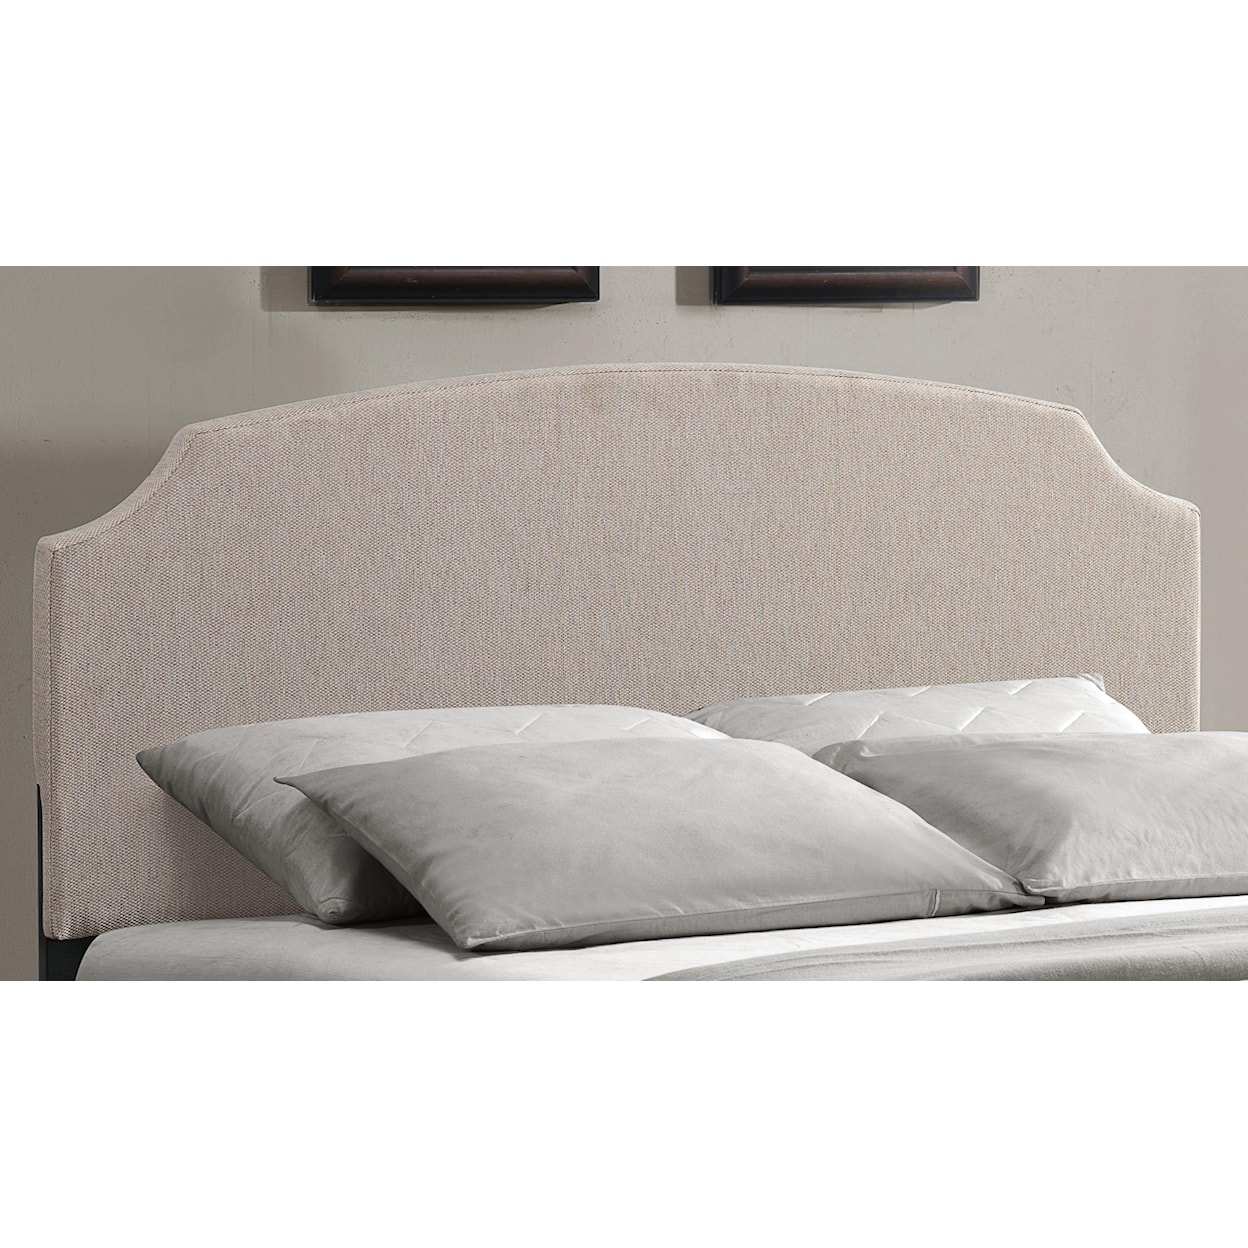 Hillsdale Upholstered Beds Lawler Queen Headboard with Frame